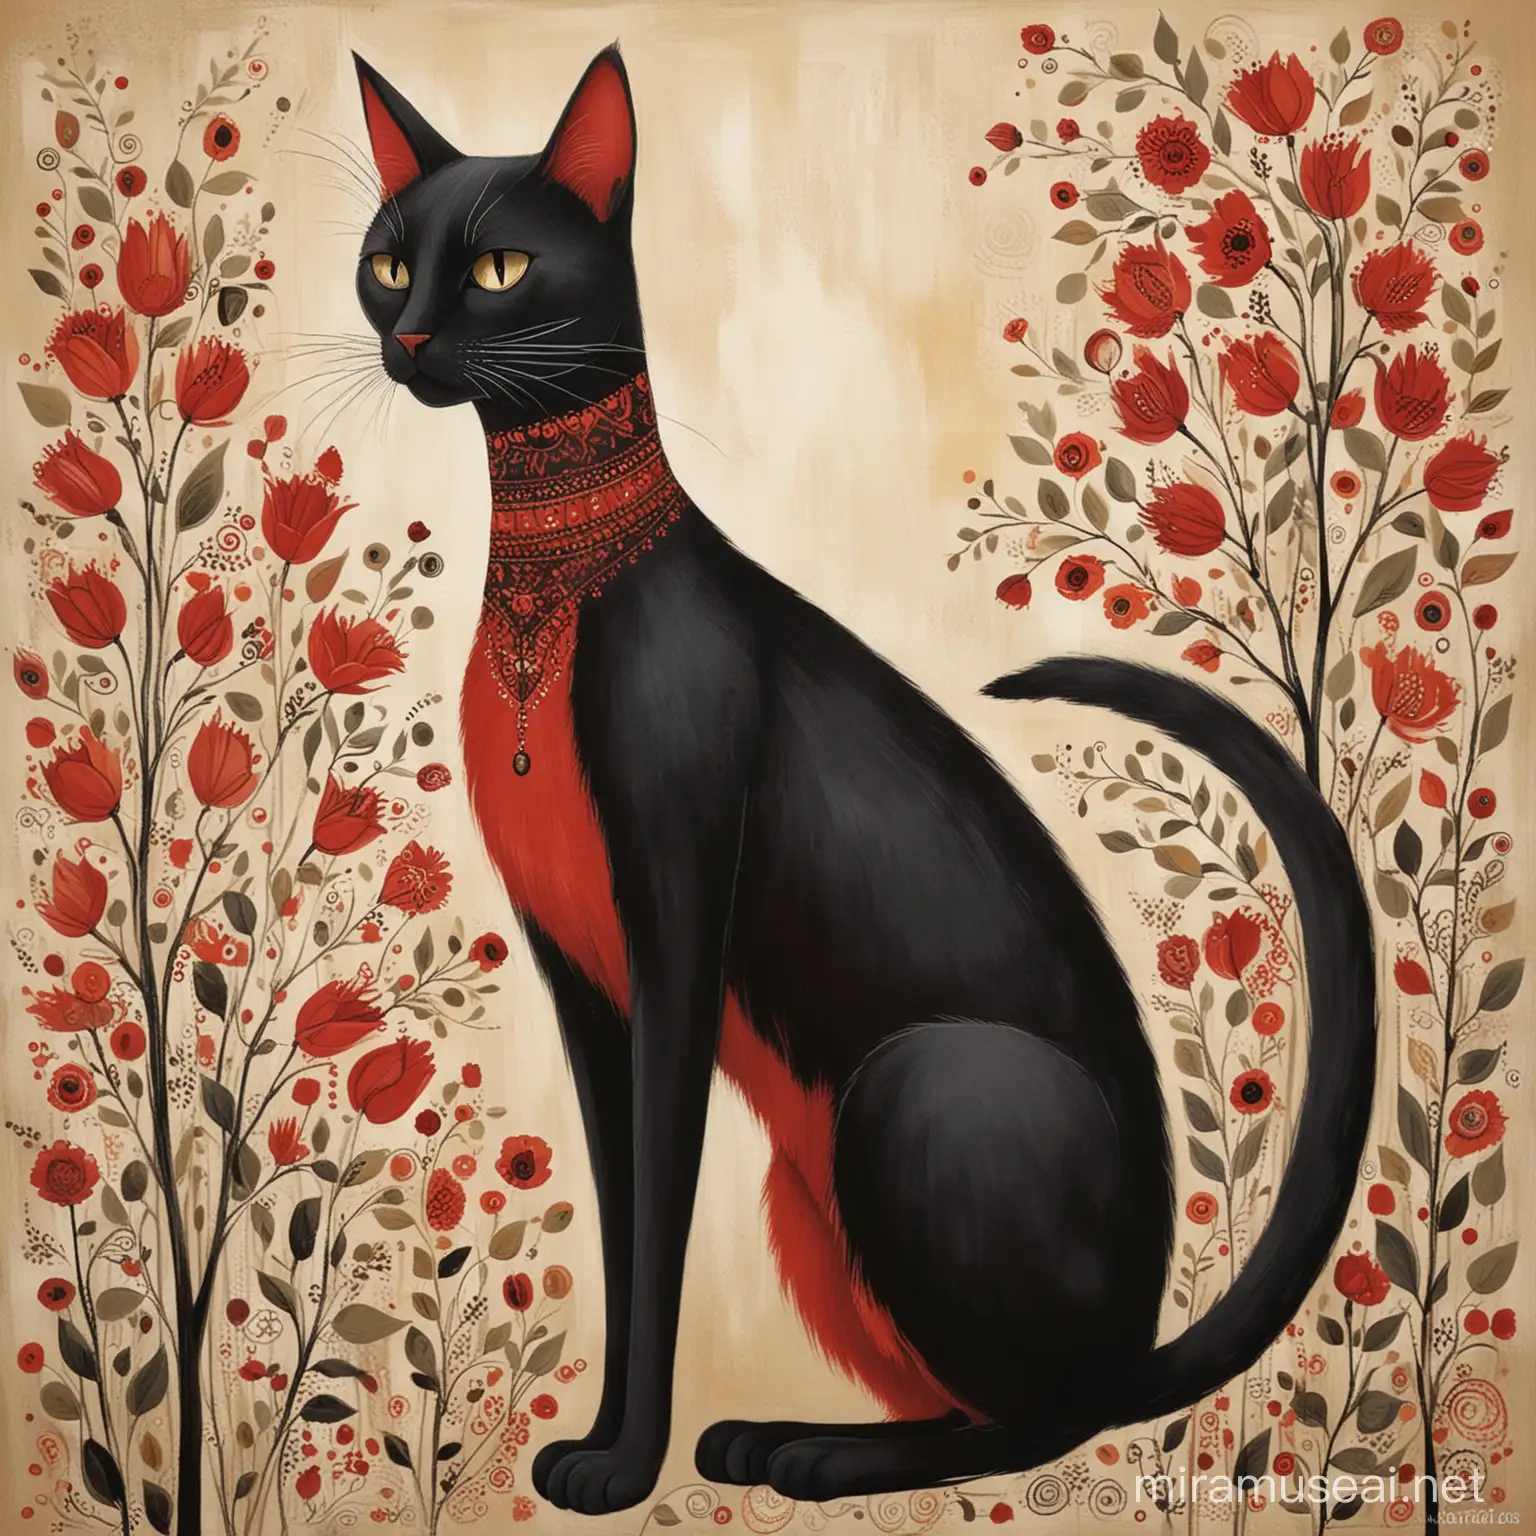 Romantic Folk Art Illustration of a Black and Red Cat with a Long Neck